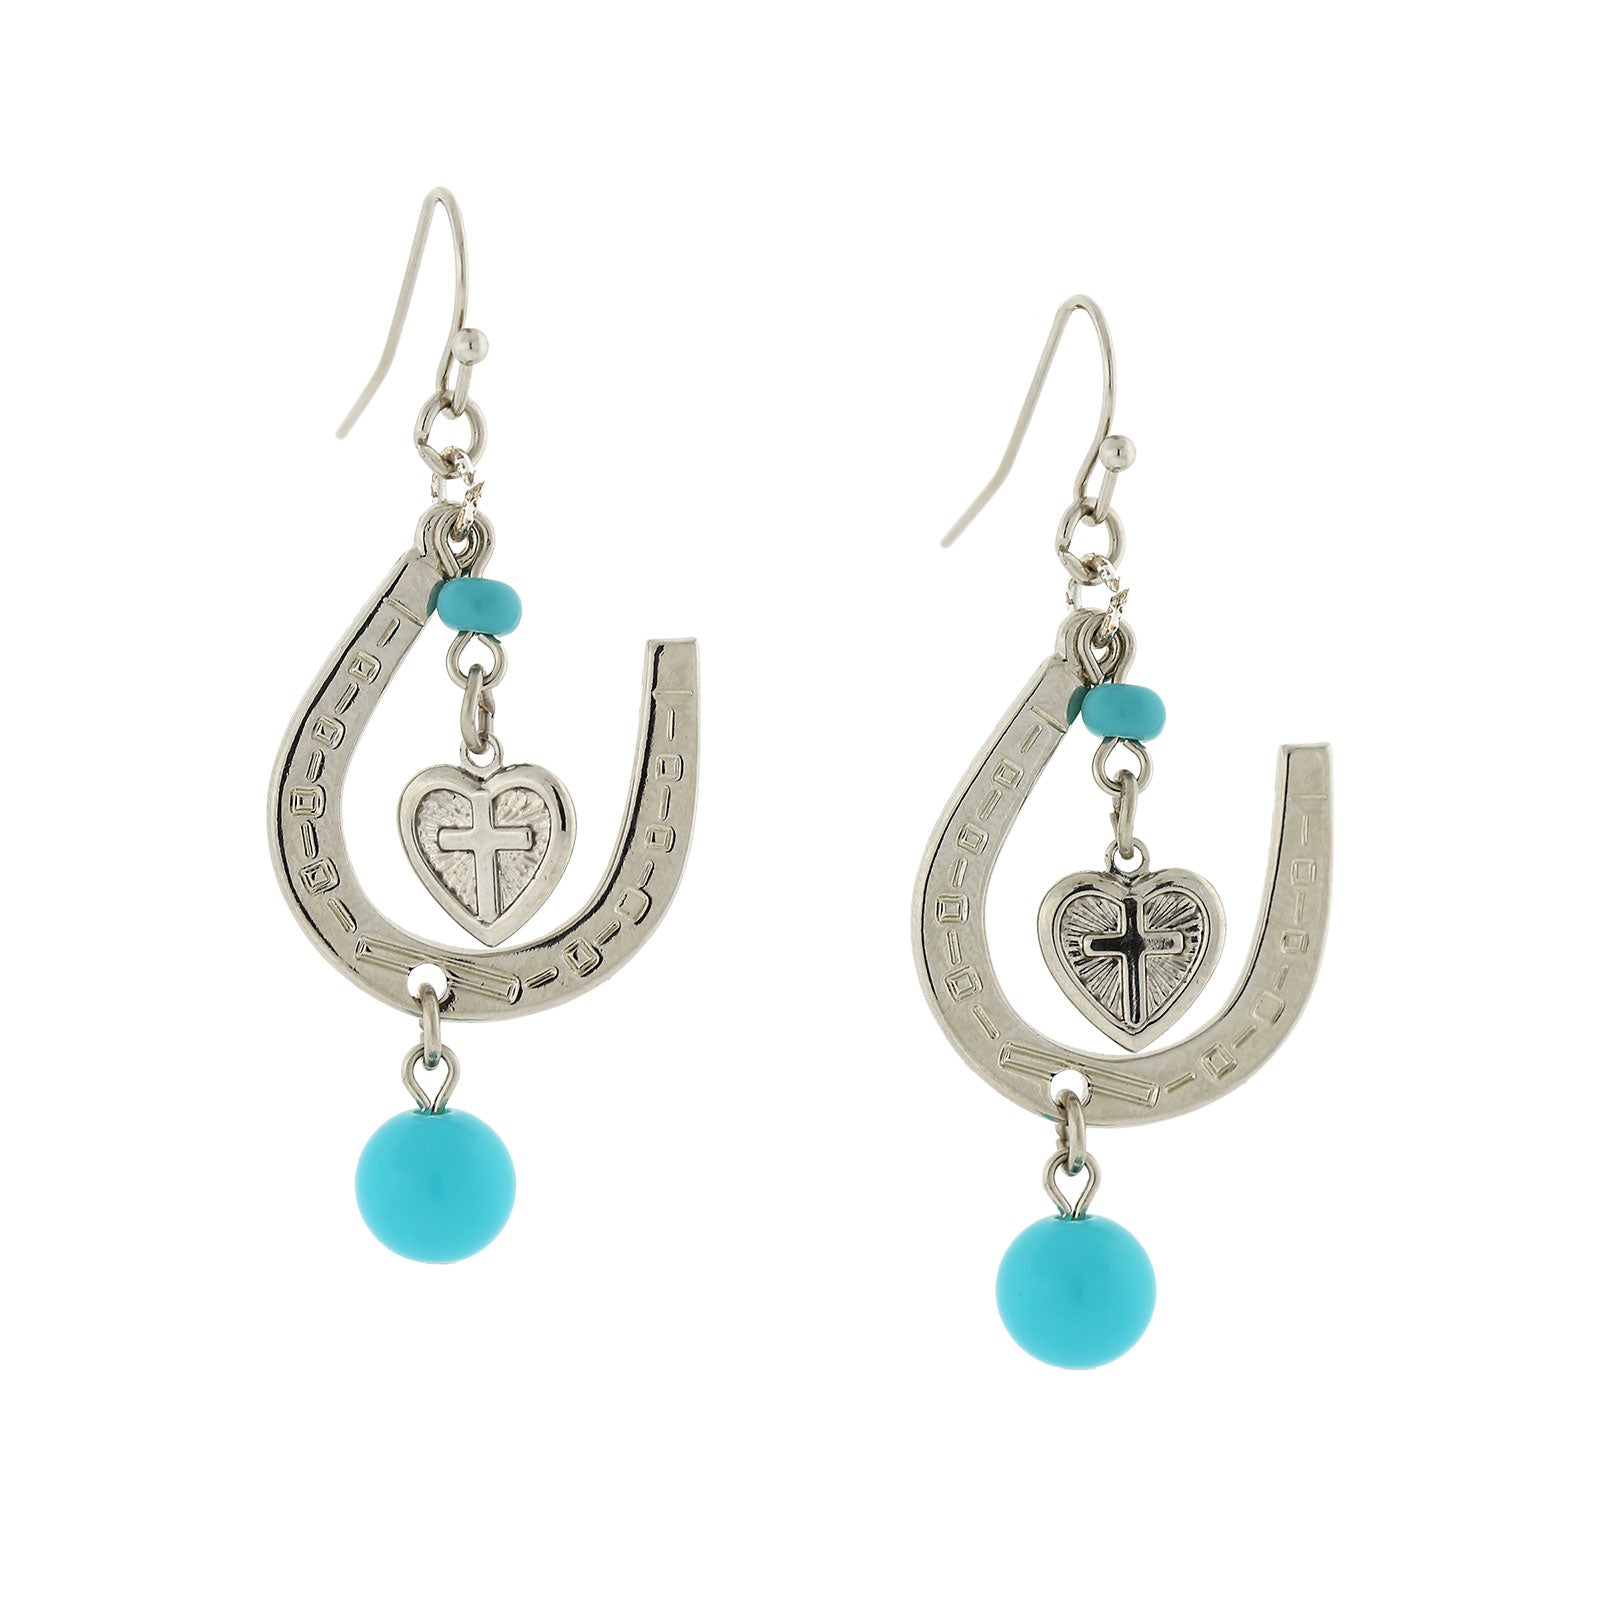 Silver-Tone Imitiation Turquoise Horseshoe and Suspended Heart Drop Earrings